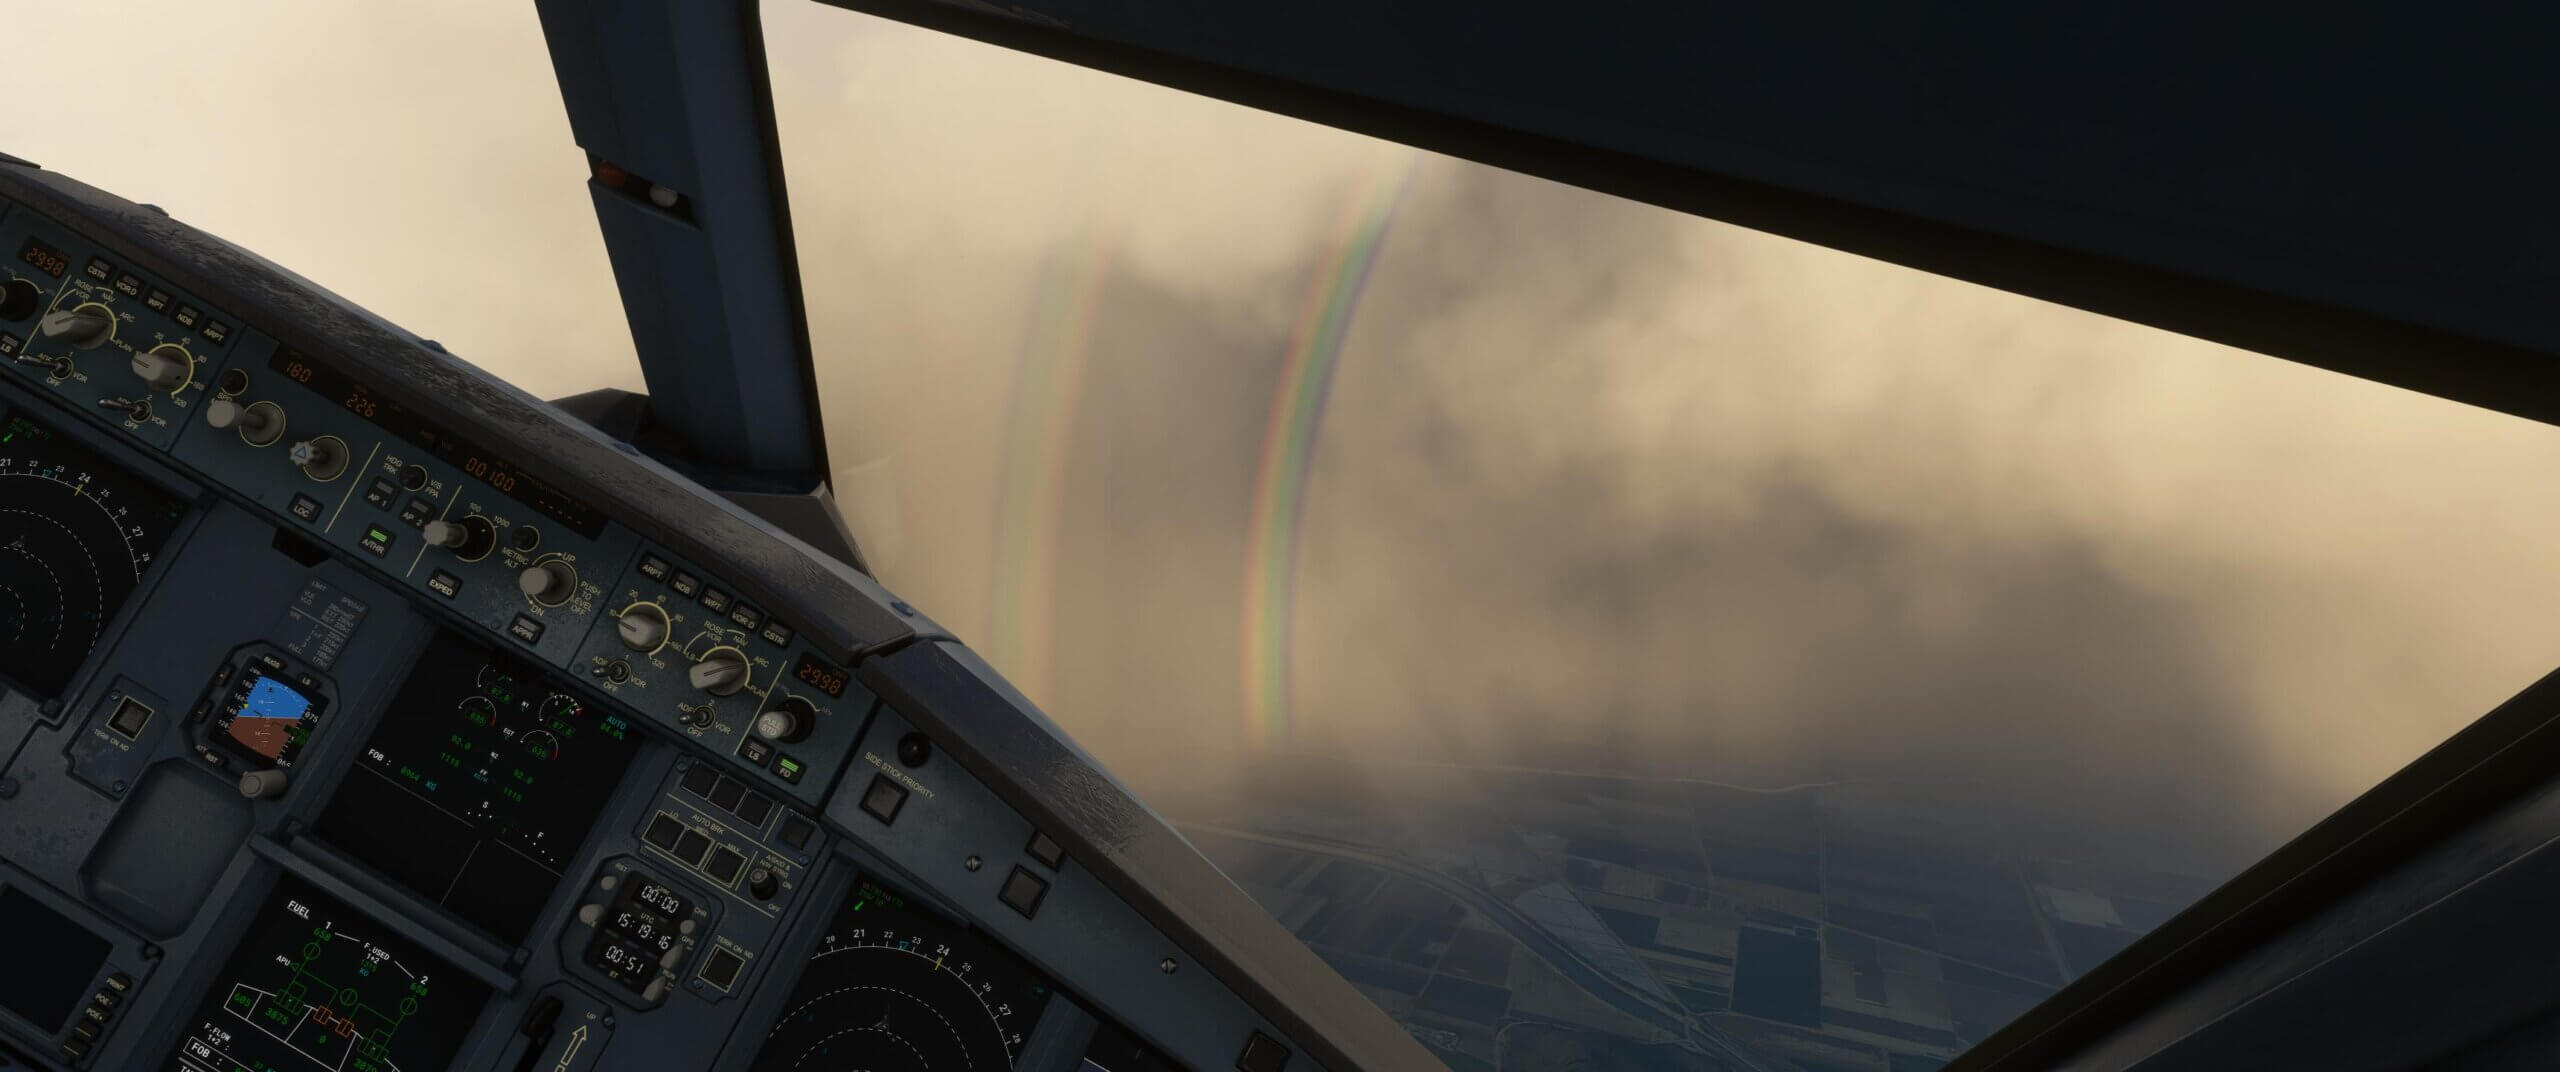 An Airbus A320 banks to the right to avoid weather, with two rainbows visible outside of the flight deck windows.